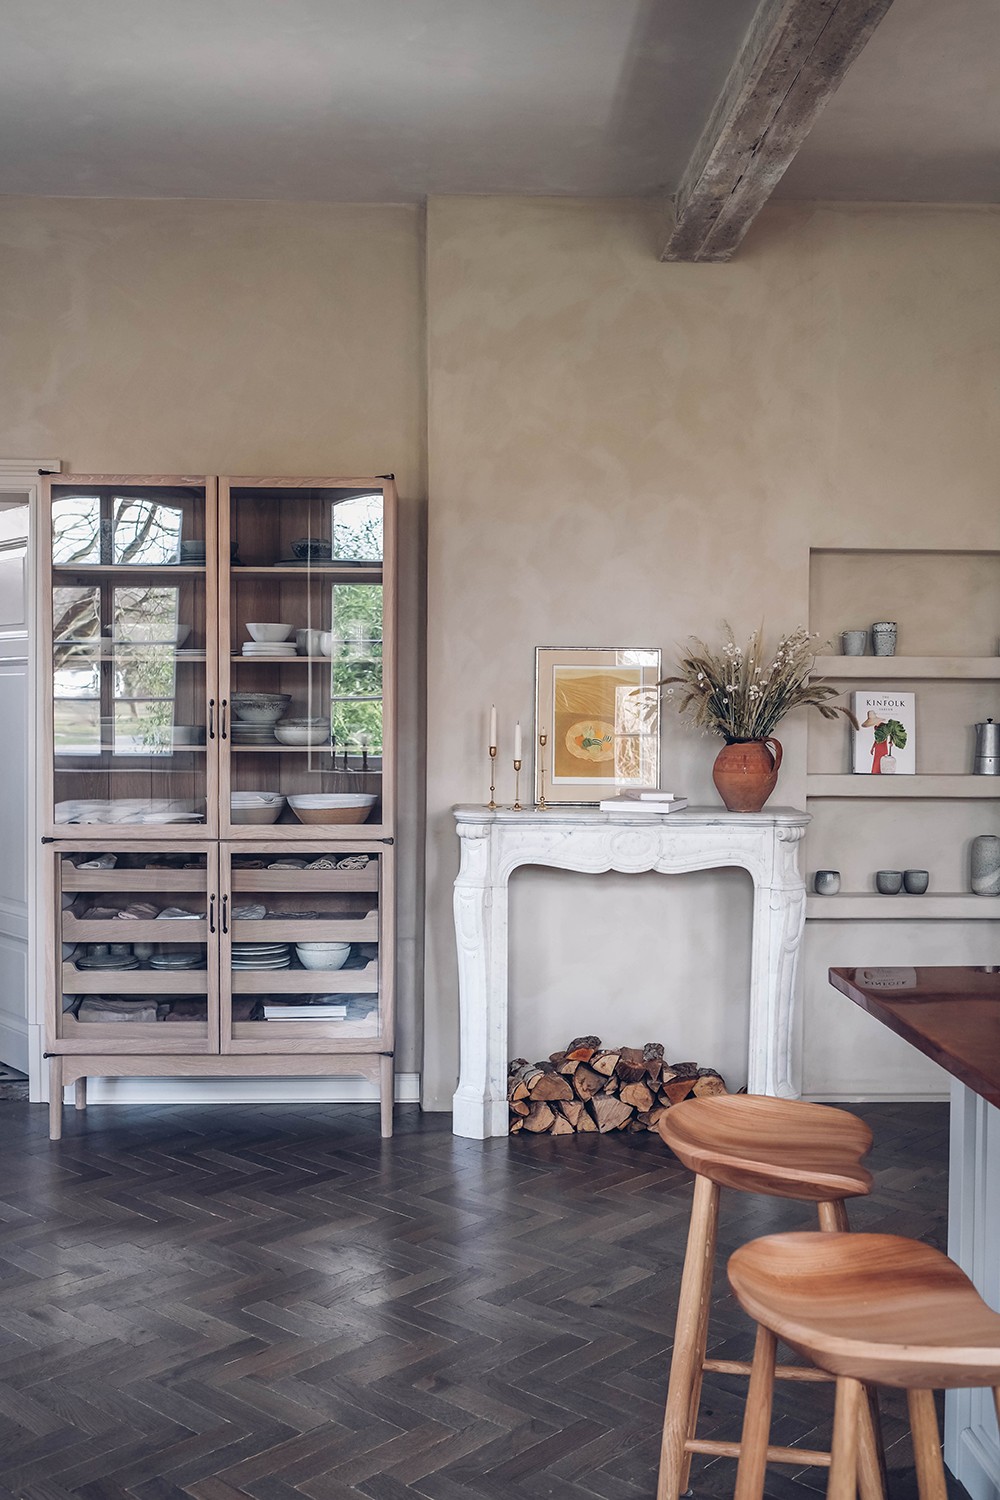 Décor Inspiration: An Elegant Kitchen in an Old Schoolhouse in the German Countryside with Marble Counters & Herringbone Floors